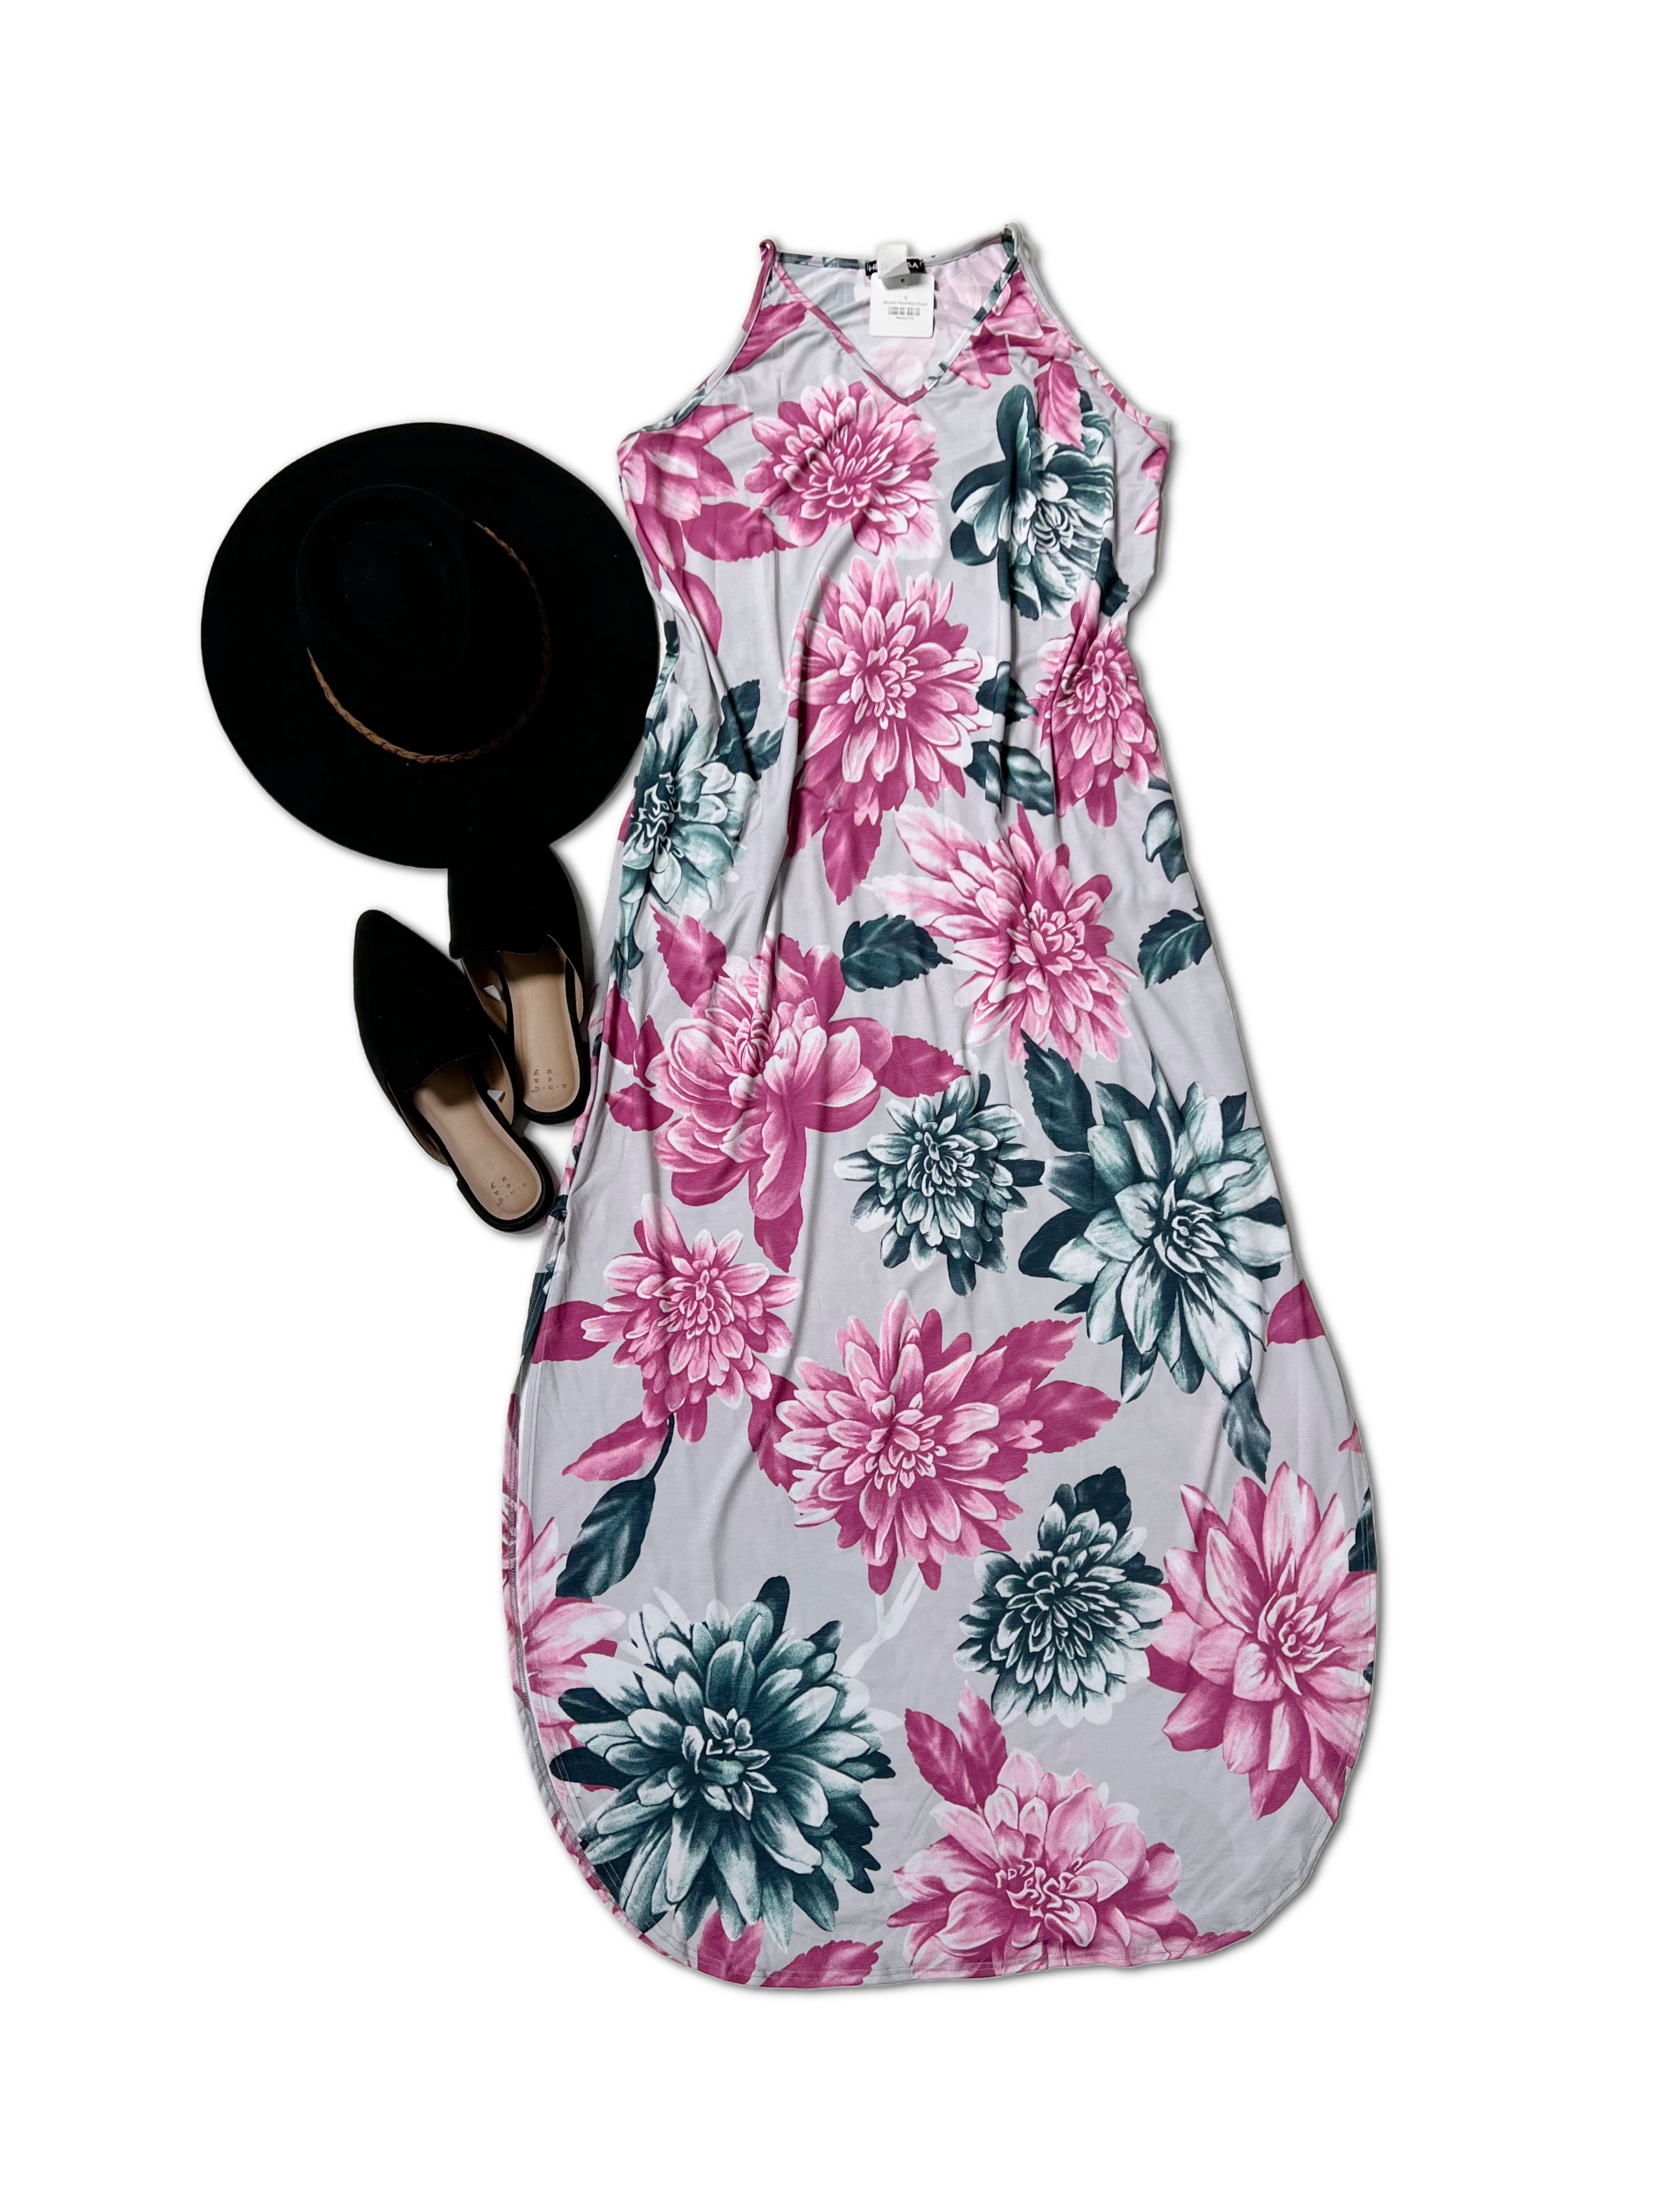 A Blissful Floral Maxi Dress with pink and green flowers on white Heimish fabric is paired with a wide-brimmed black hat and stylish, practical black slip-on shoes with pointed toes, set against a white backdrop.